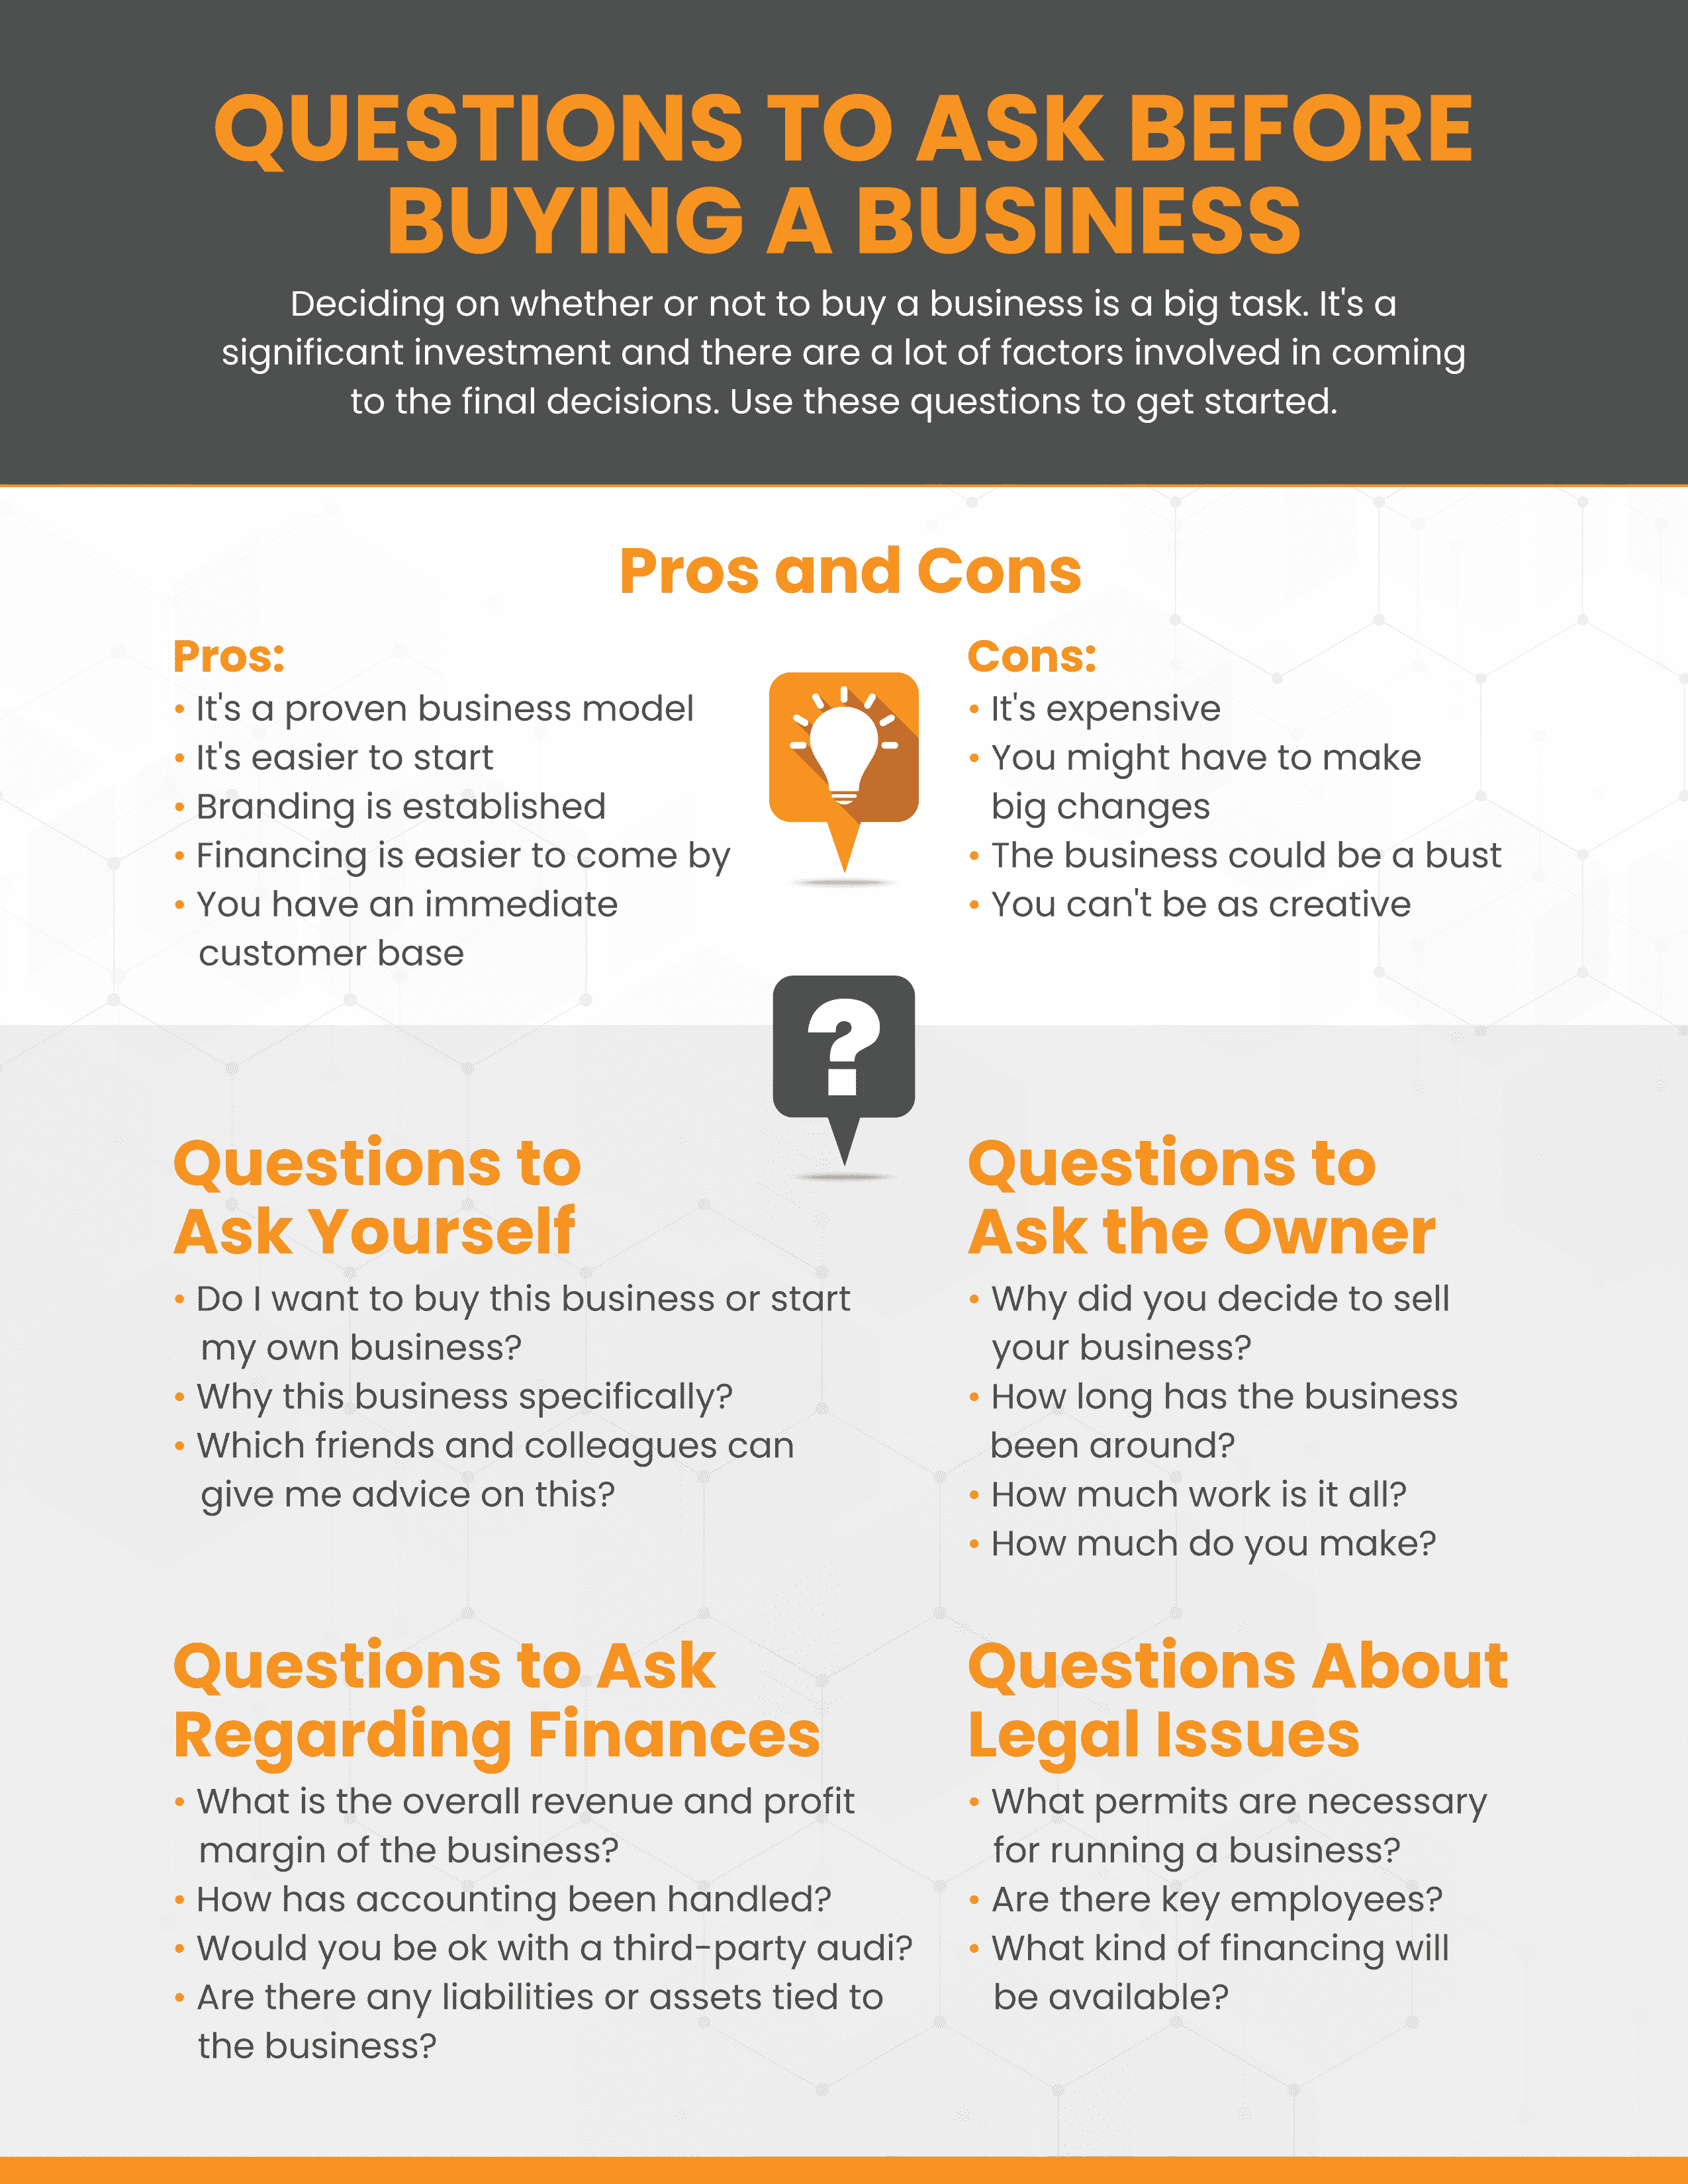 Infographic showing the pros and cons of buying a business and featuring 14 questions to ask before buying a business